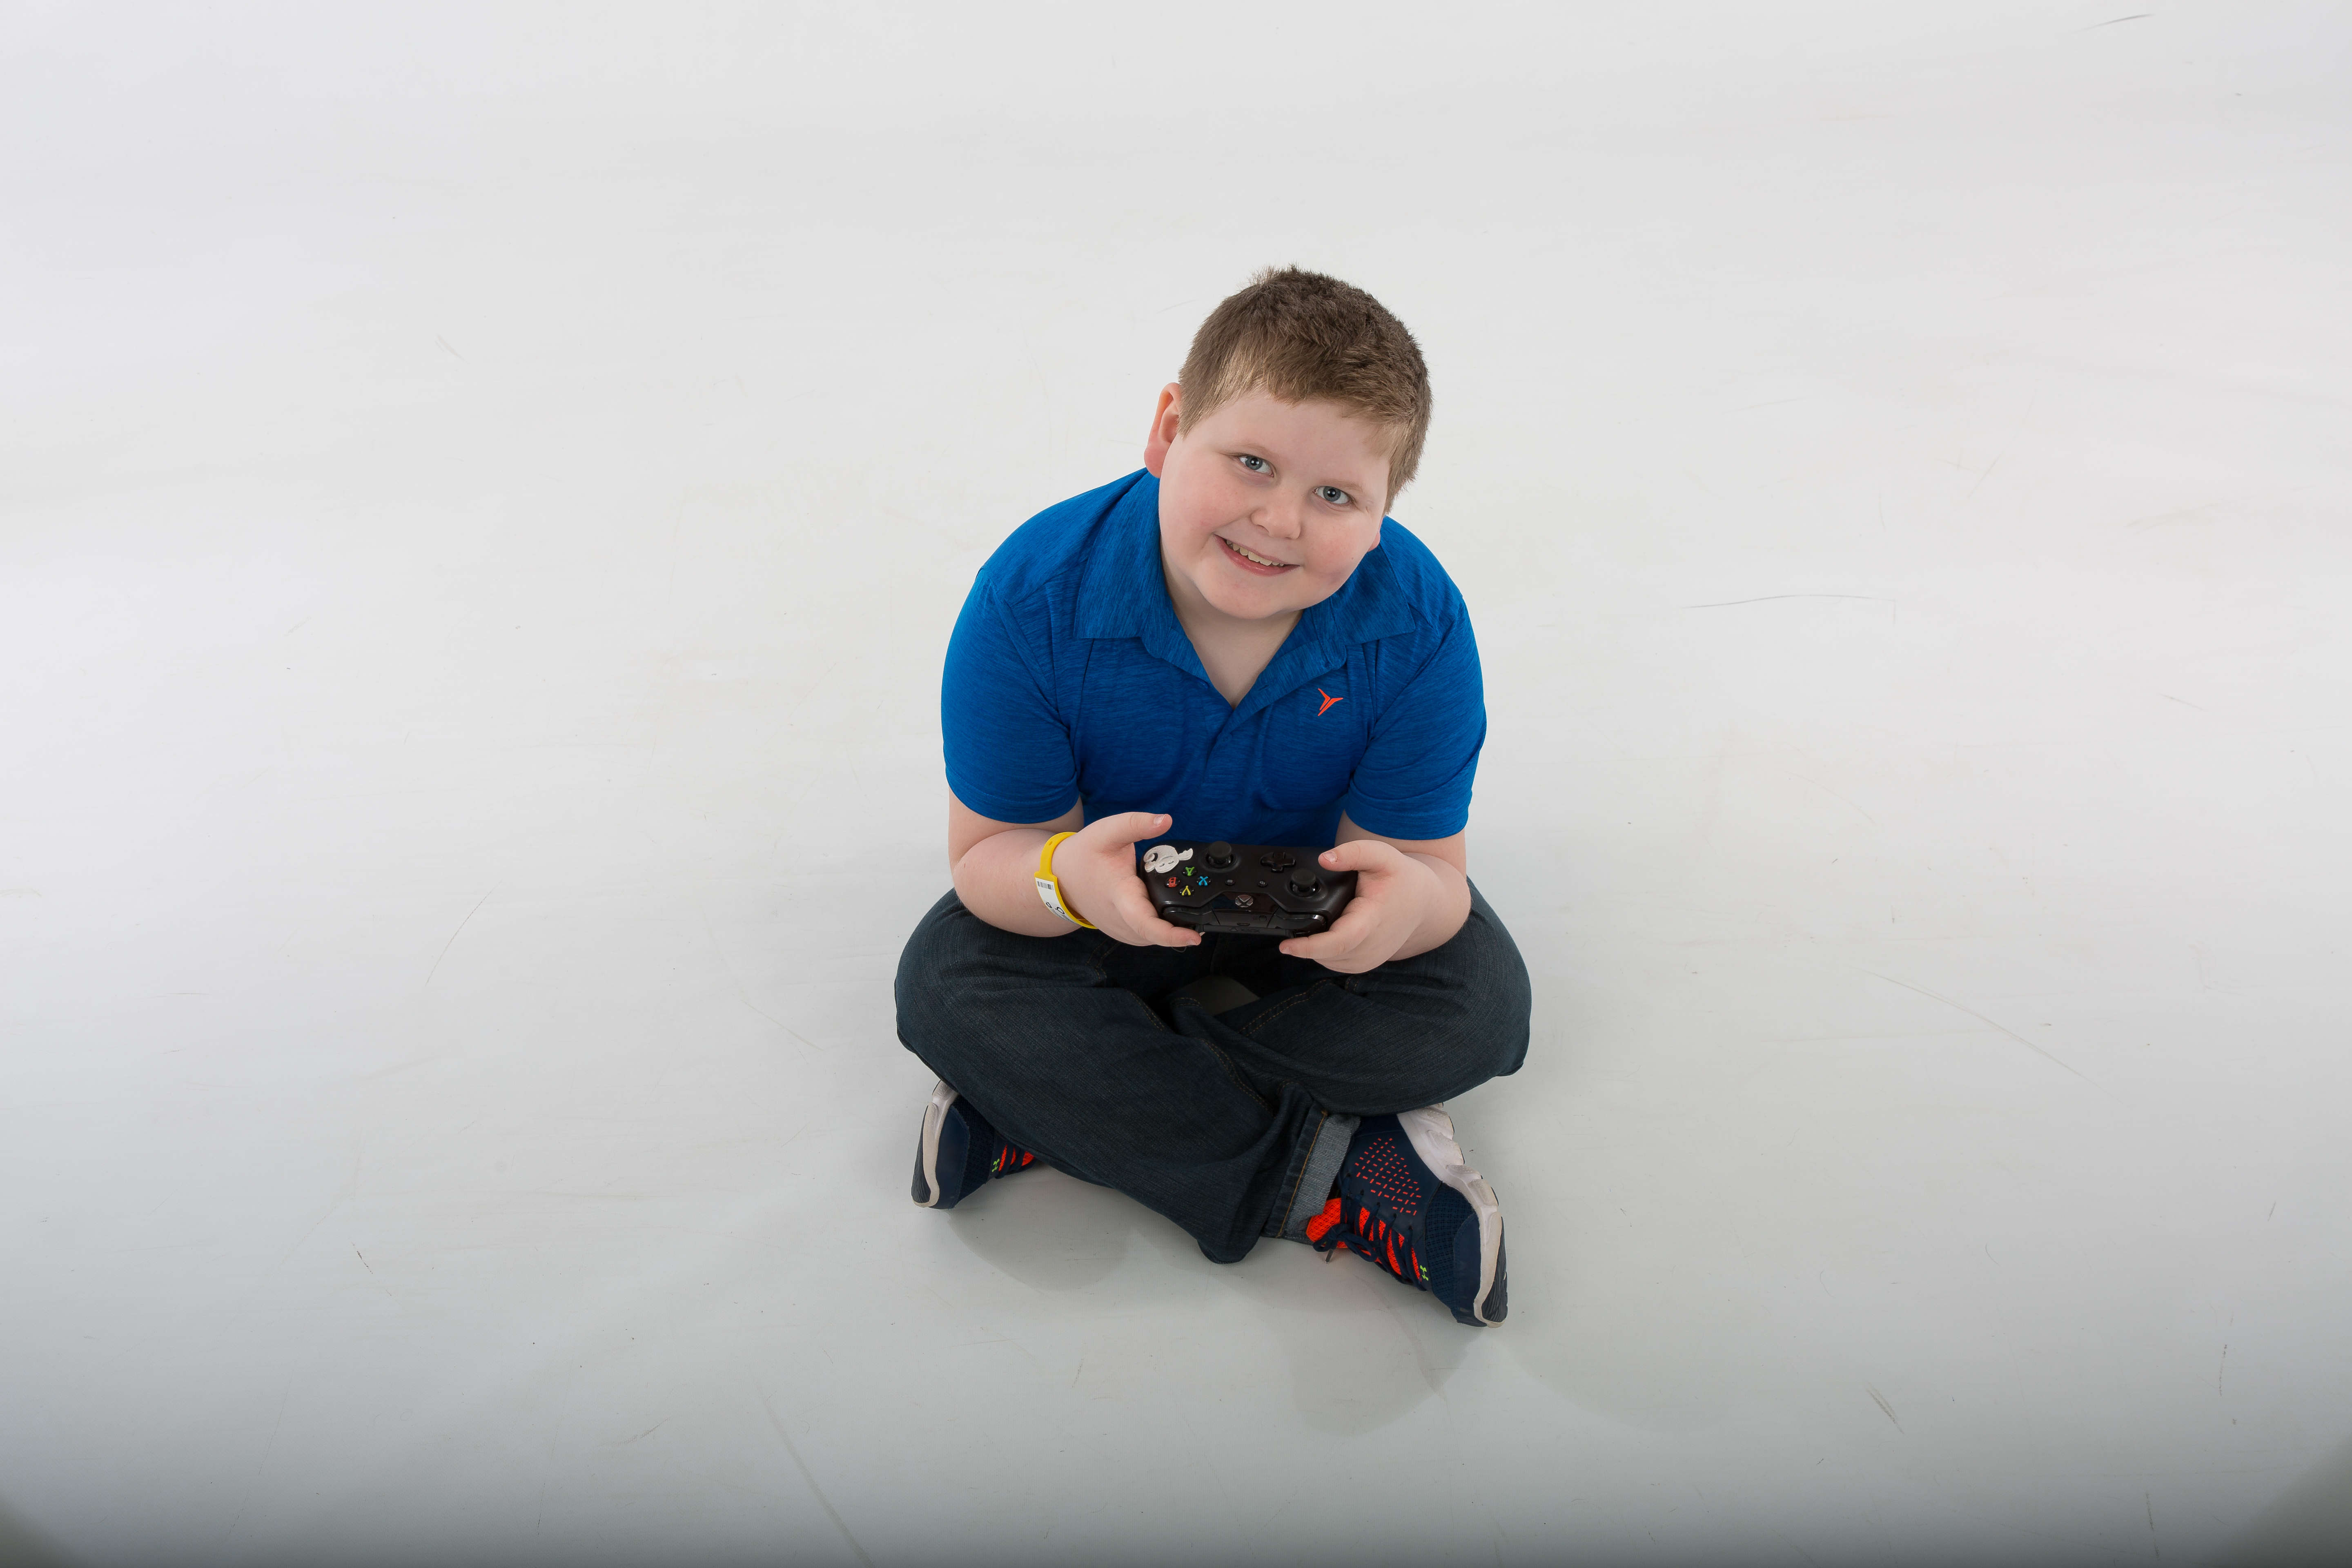 A young boy sits on the floor holding a video game controller with both hands, looking up at the camera, smiling.